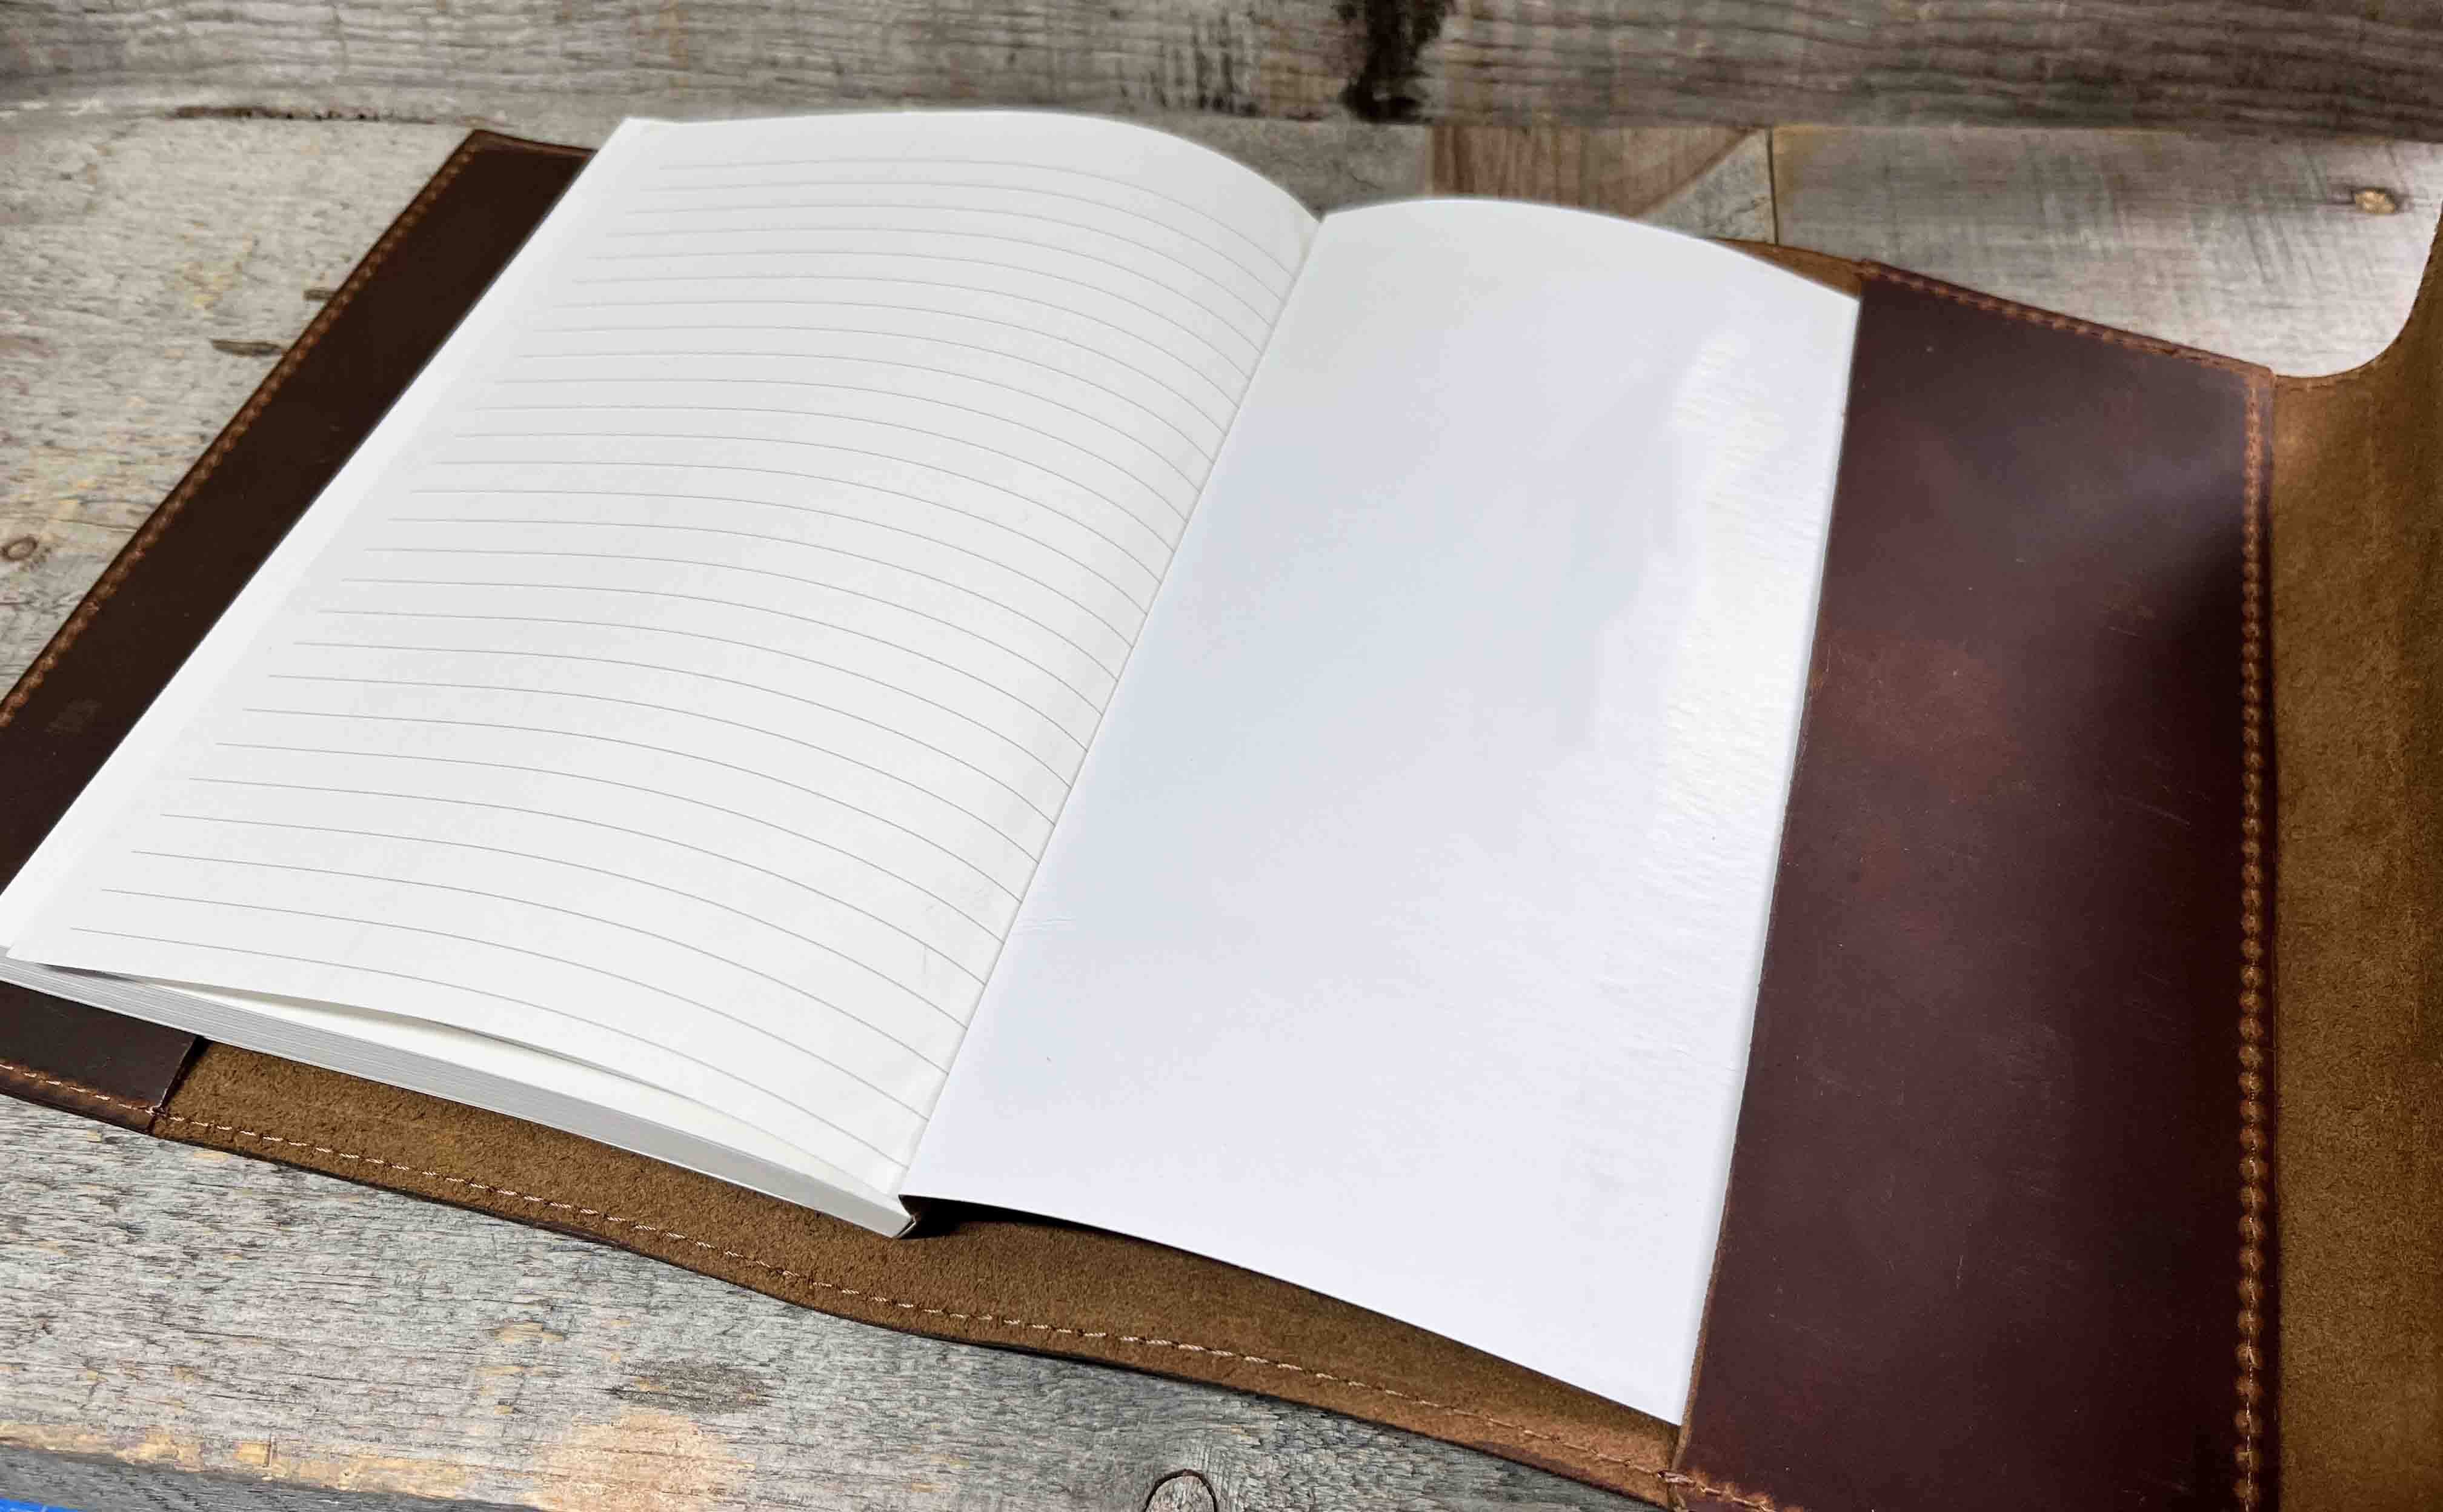 Refill Notebook for the Refillable Journal - Lined Paper